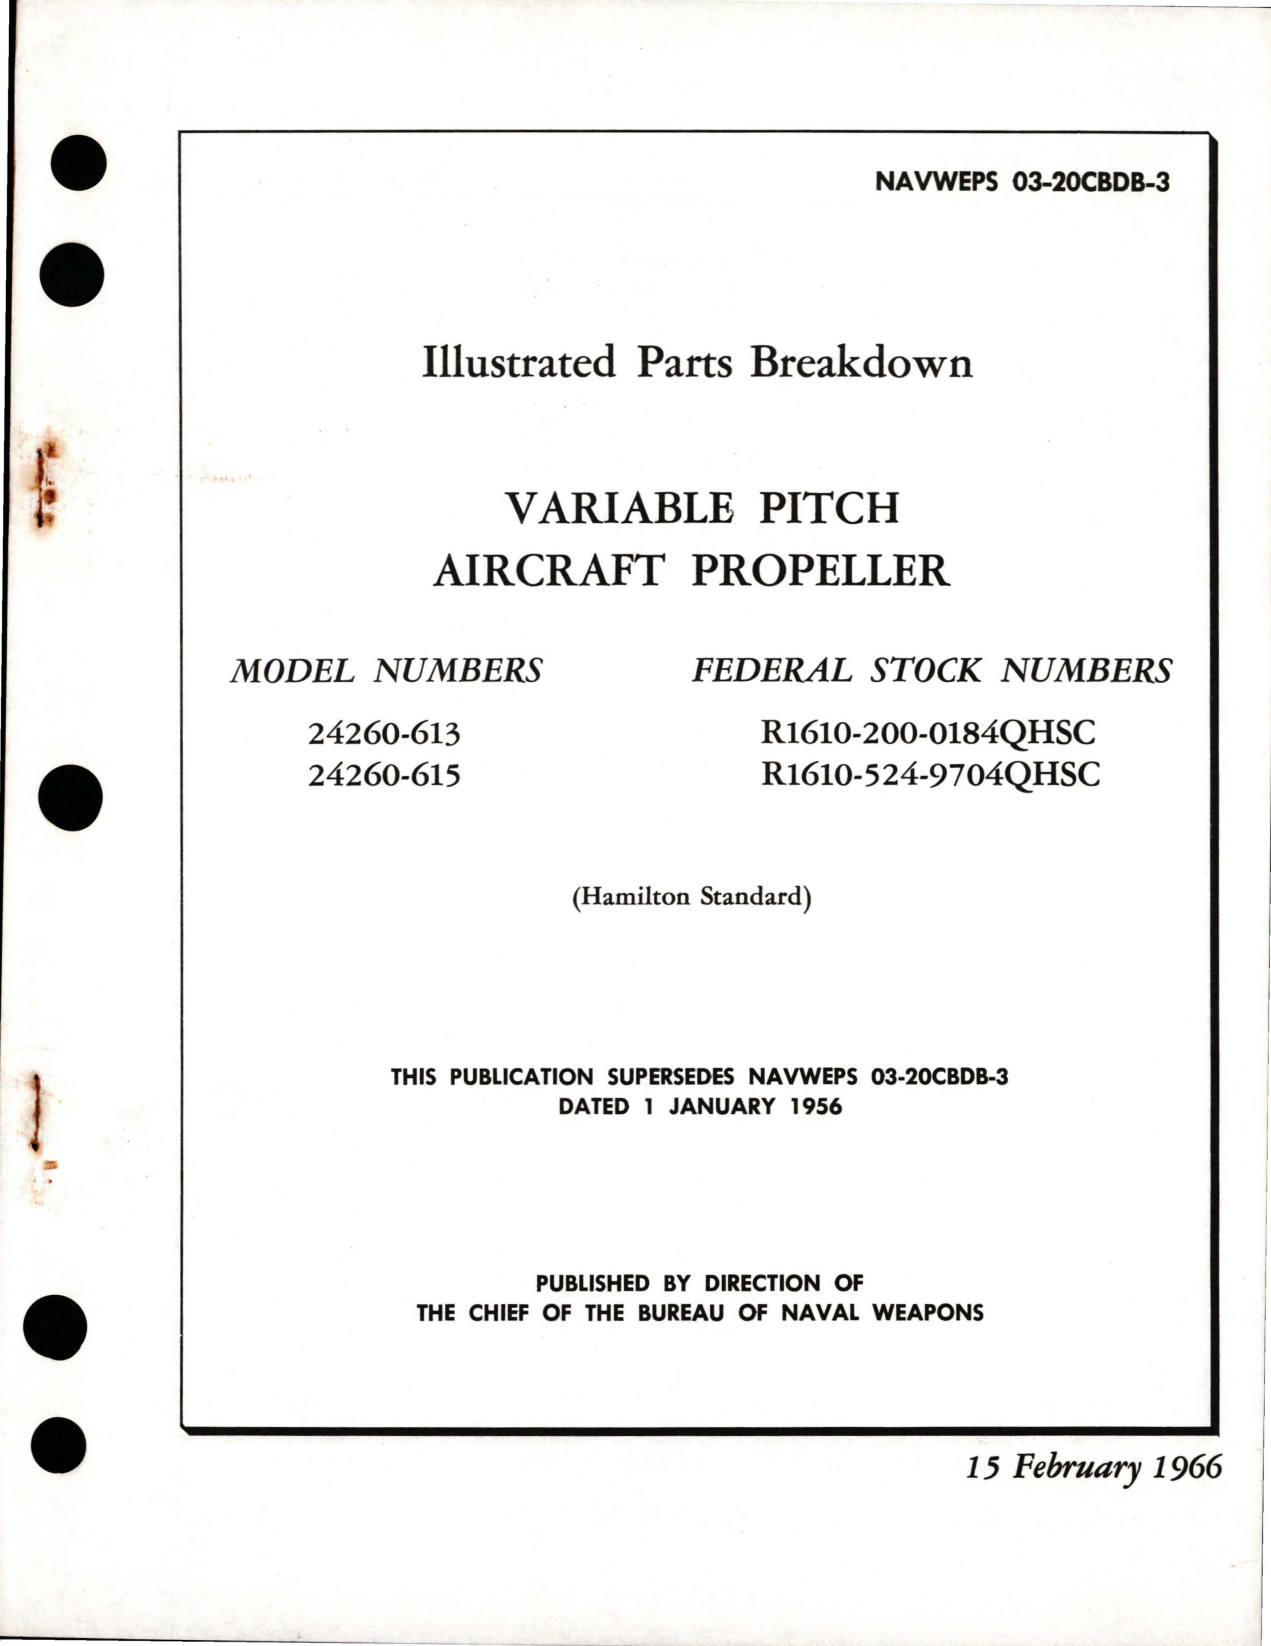 Sample page 1 from AirCorps Library document: Illustrated Parts Breakdown for Variable Pitch Propeller - Model 24260-613 and 24260-615